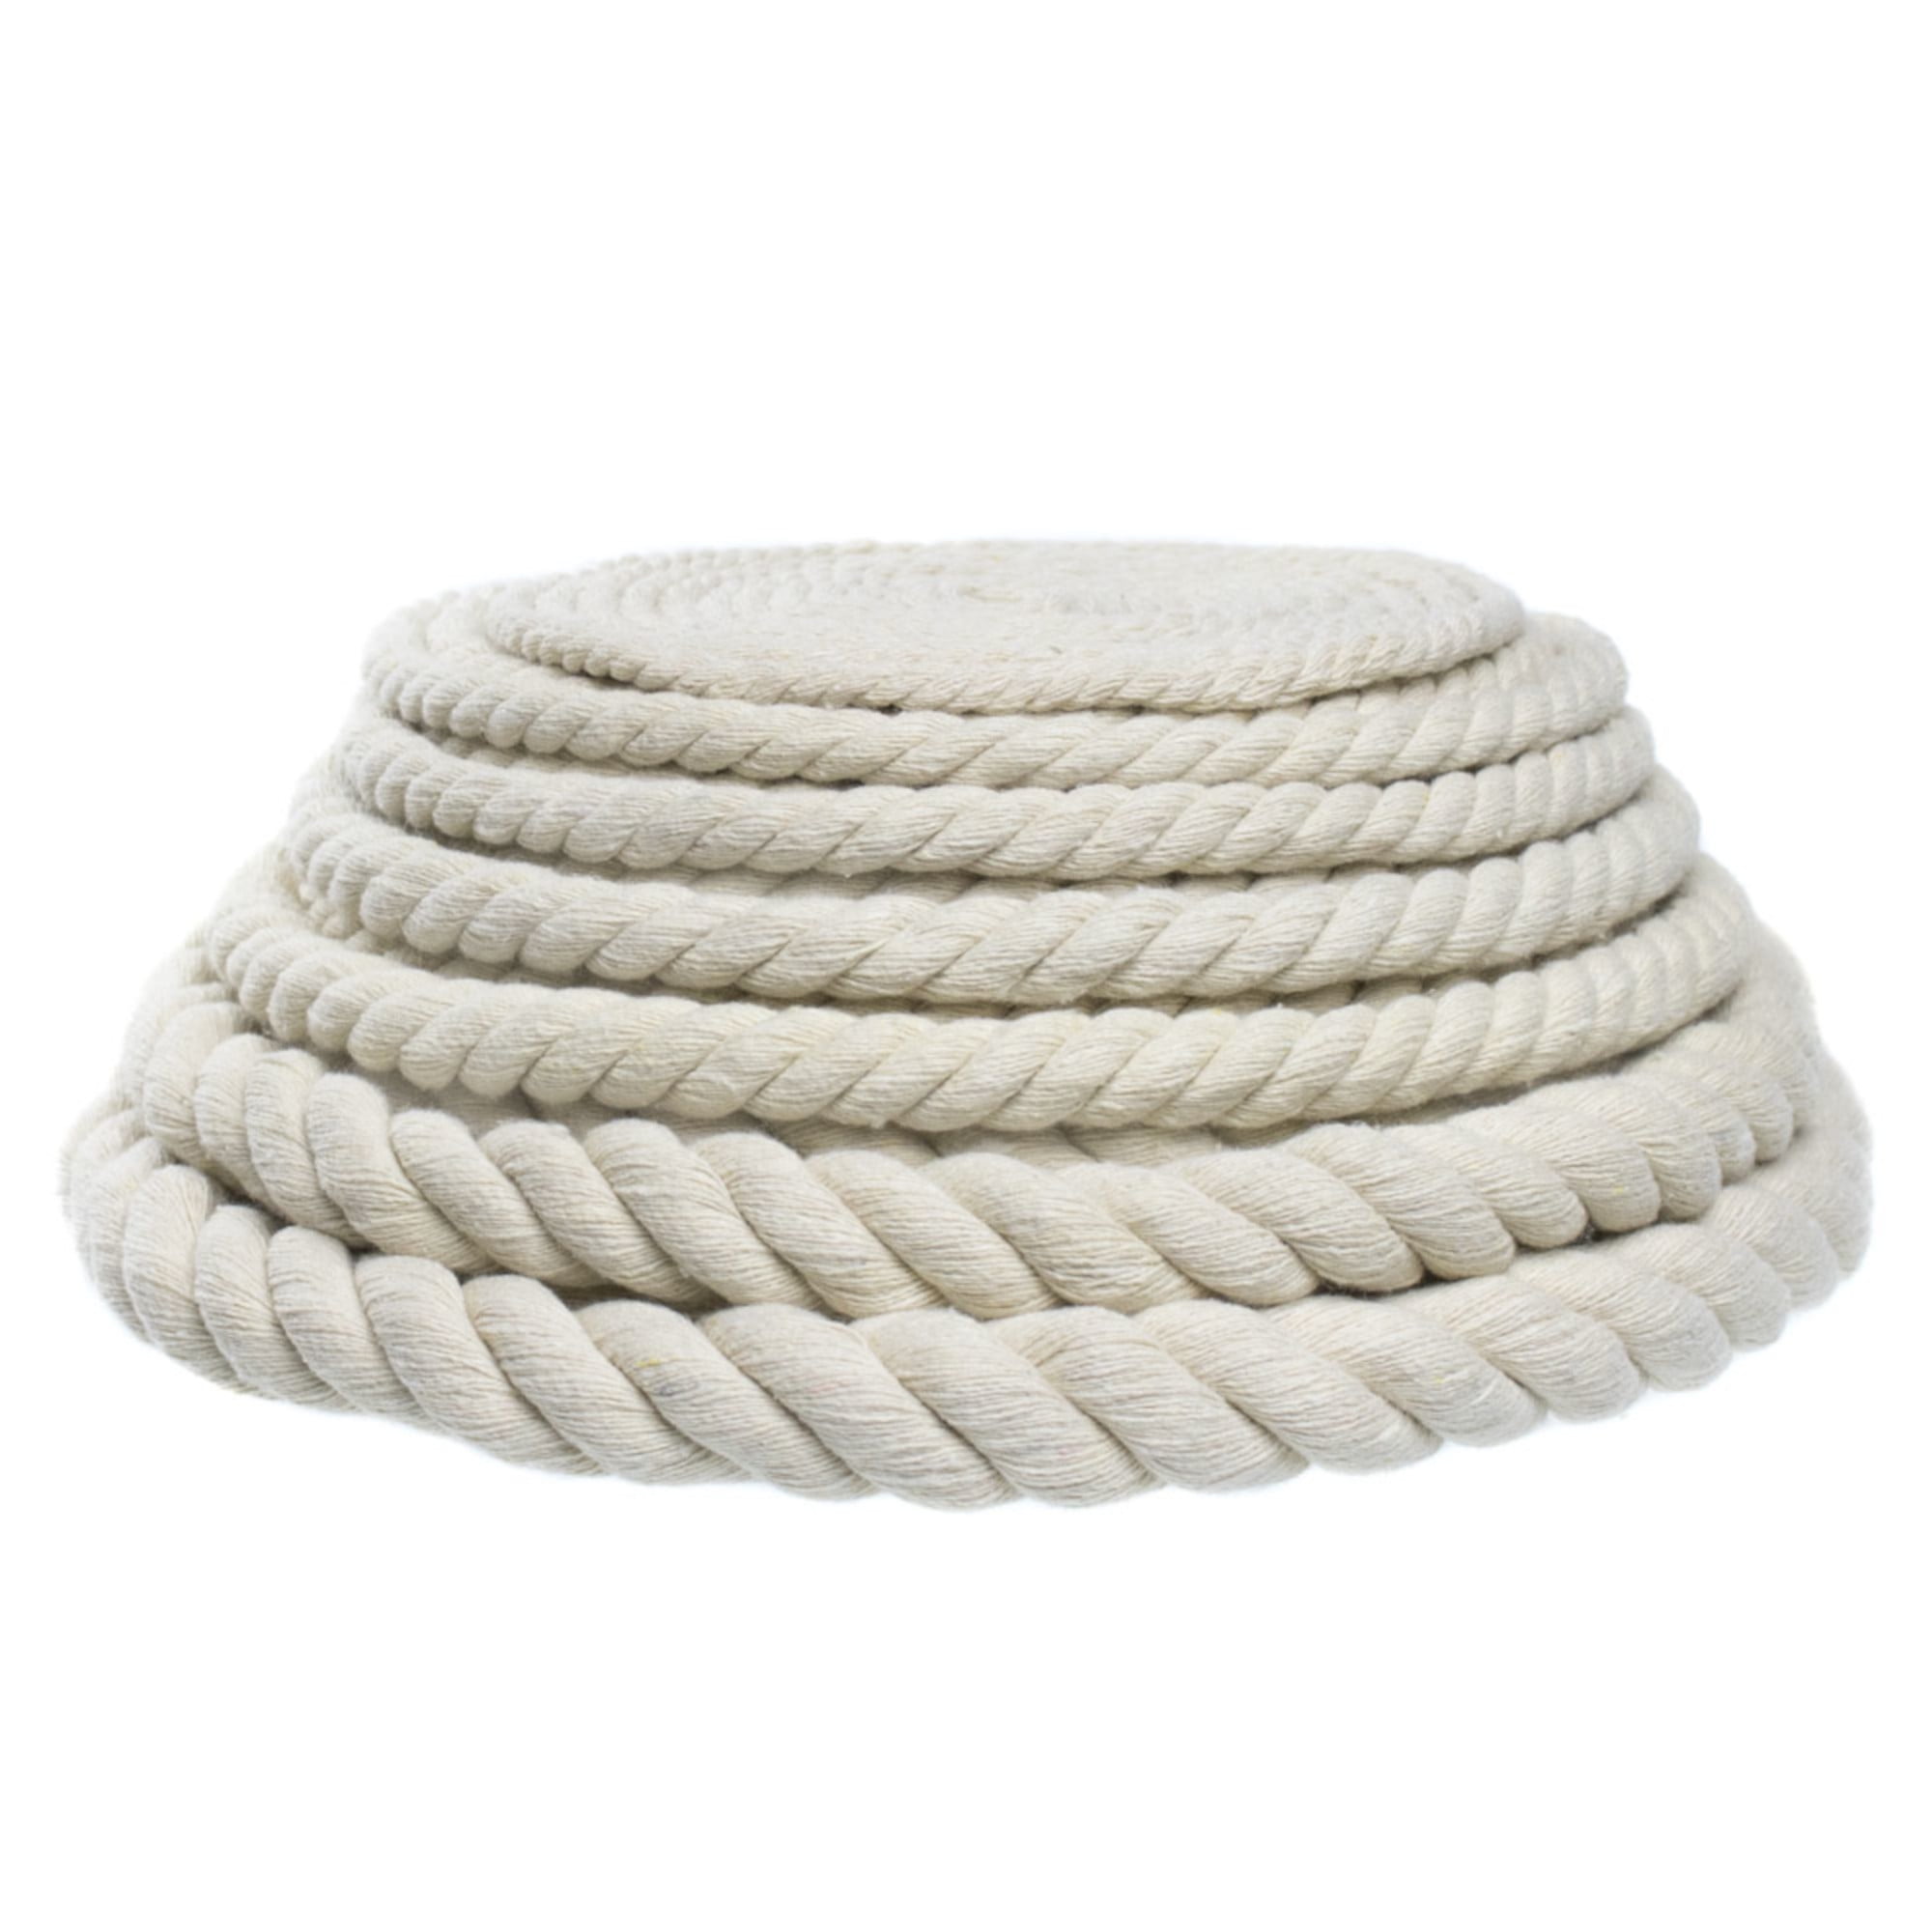 32 ft Natural White Rope,3/8 inch Cotton Rope,4Ply Soft Rope Cord